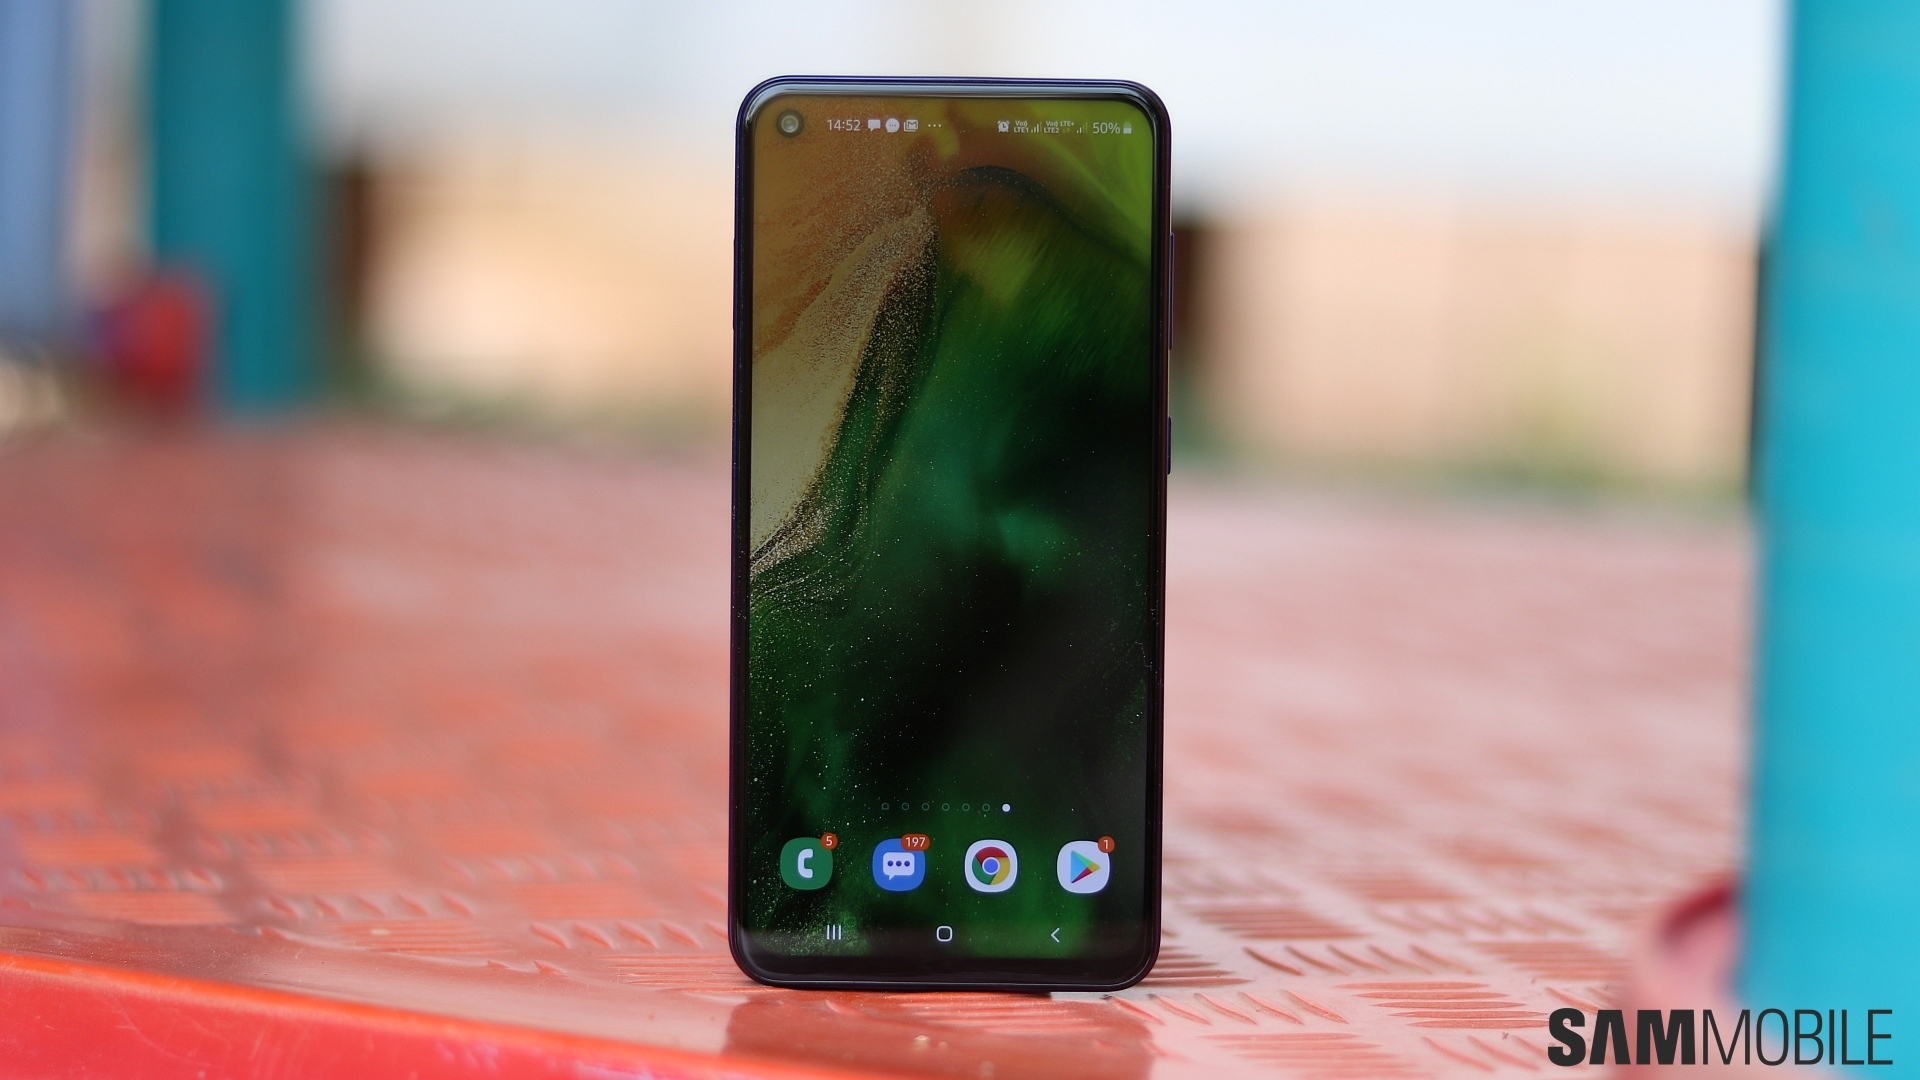 Samsung Galaxy M40 Android 10 update is live in India - SamMobile